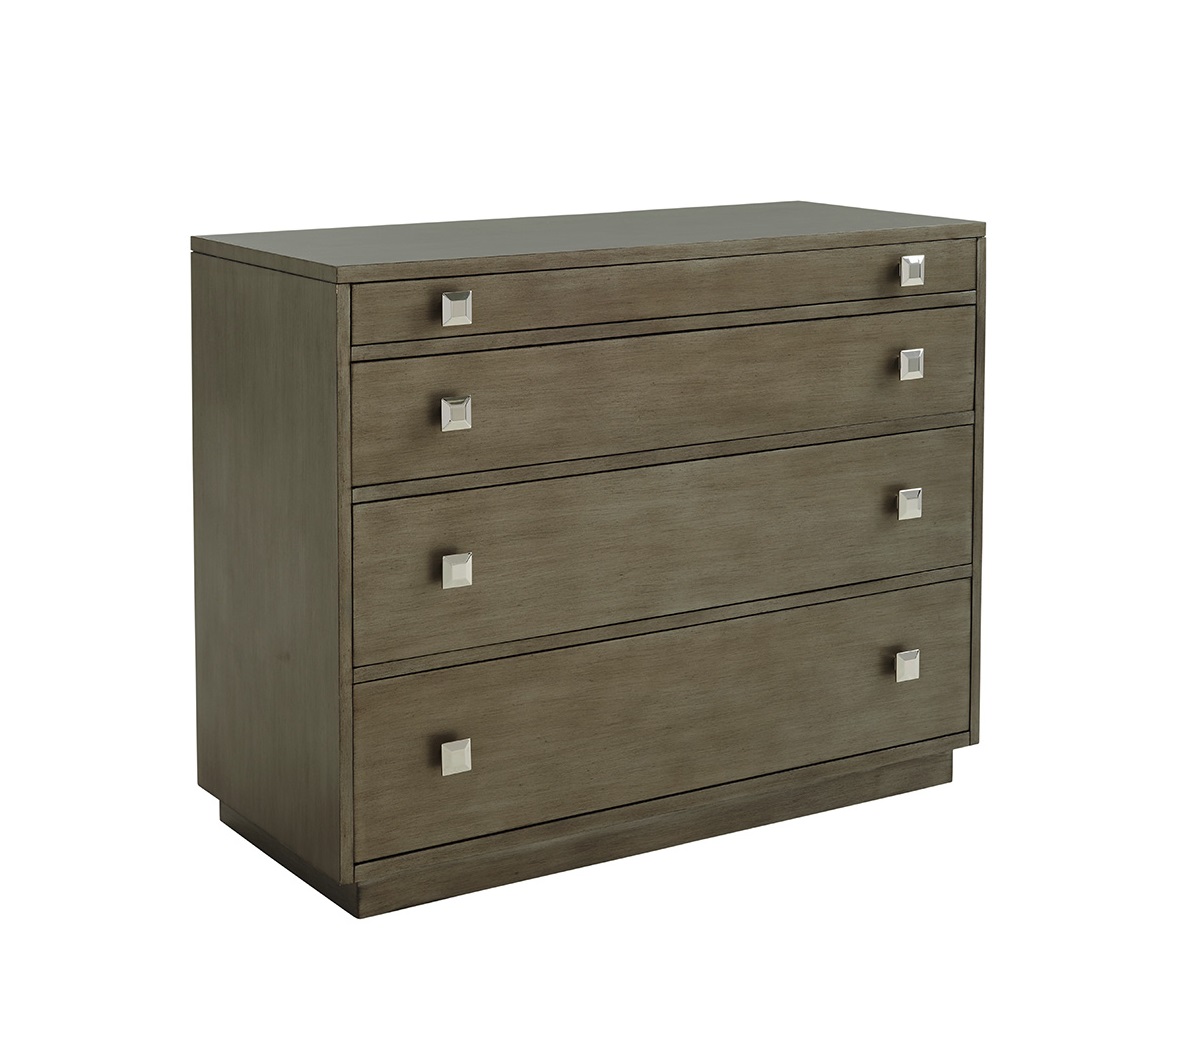 Ariana Cavalaire Bachelor's Chest, Lexington Cheap Chest Of Drawers For Sale Brooklyn New York, Furniture By ABD